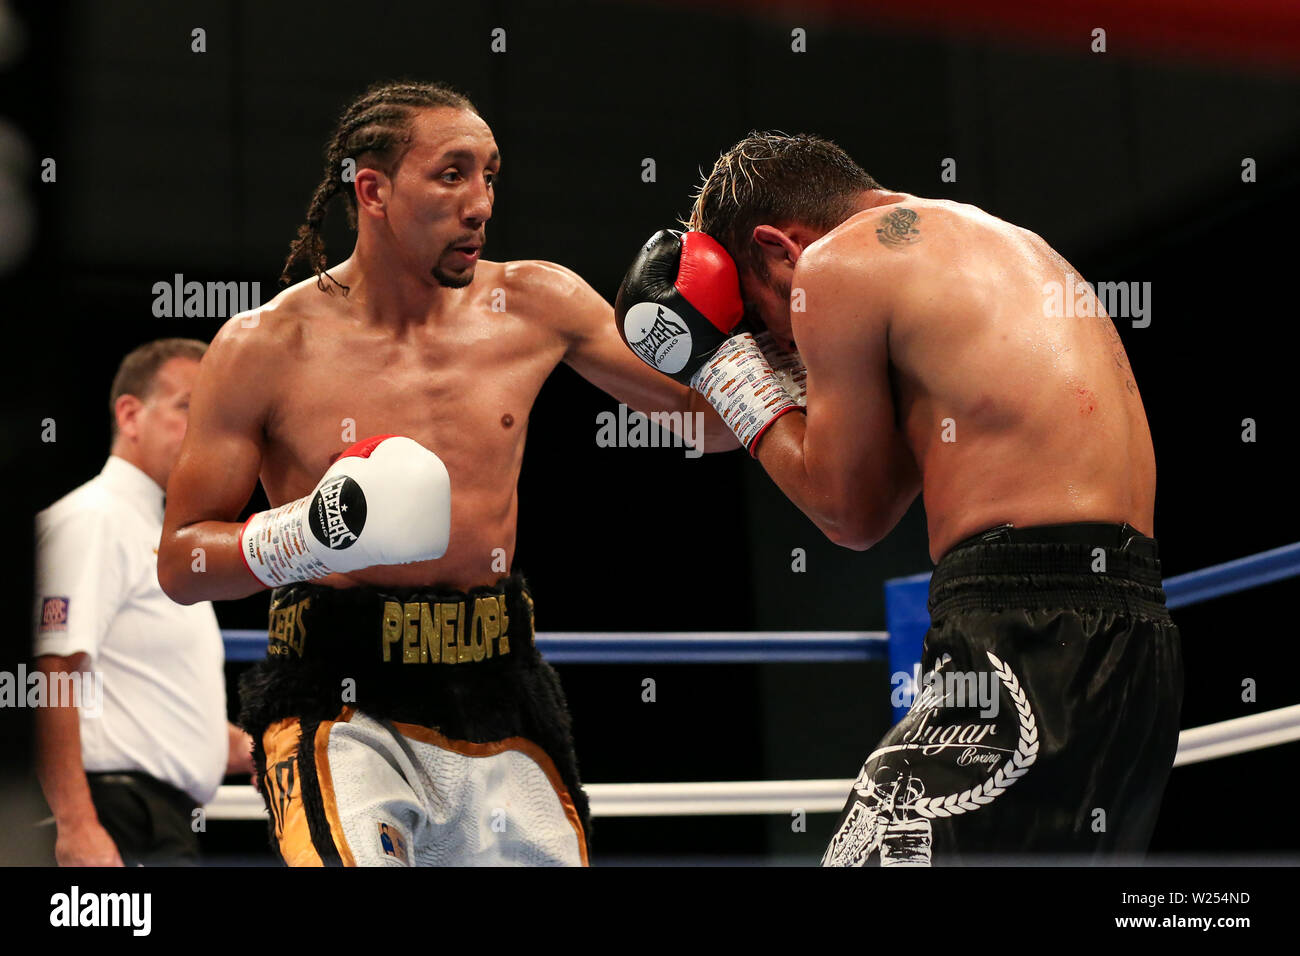 Tyrone Nurse lands a left hook on Oscar Amador during the Dennis Hobson Promotions boxing event at Ponds Forge, Sheffield. Picture date: 5th July 2019 Stock Photo